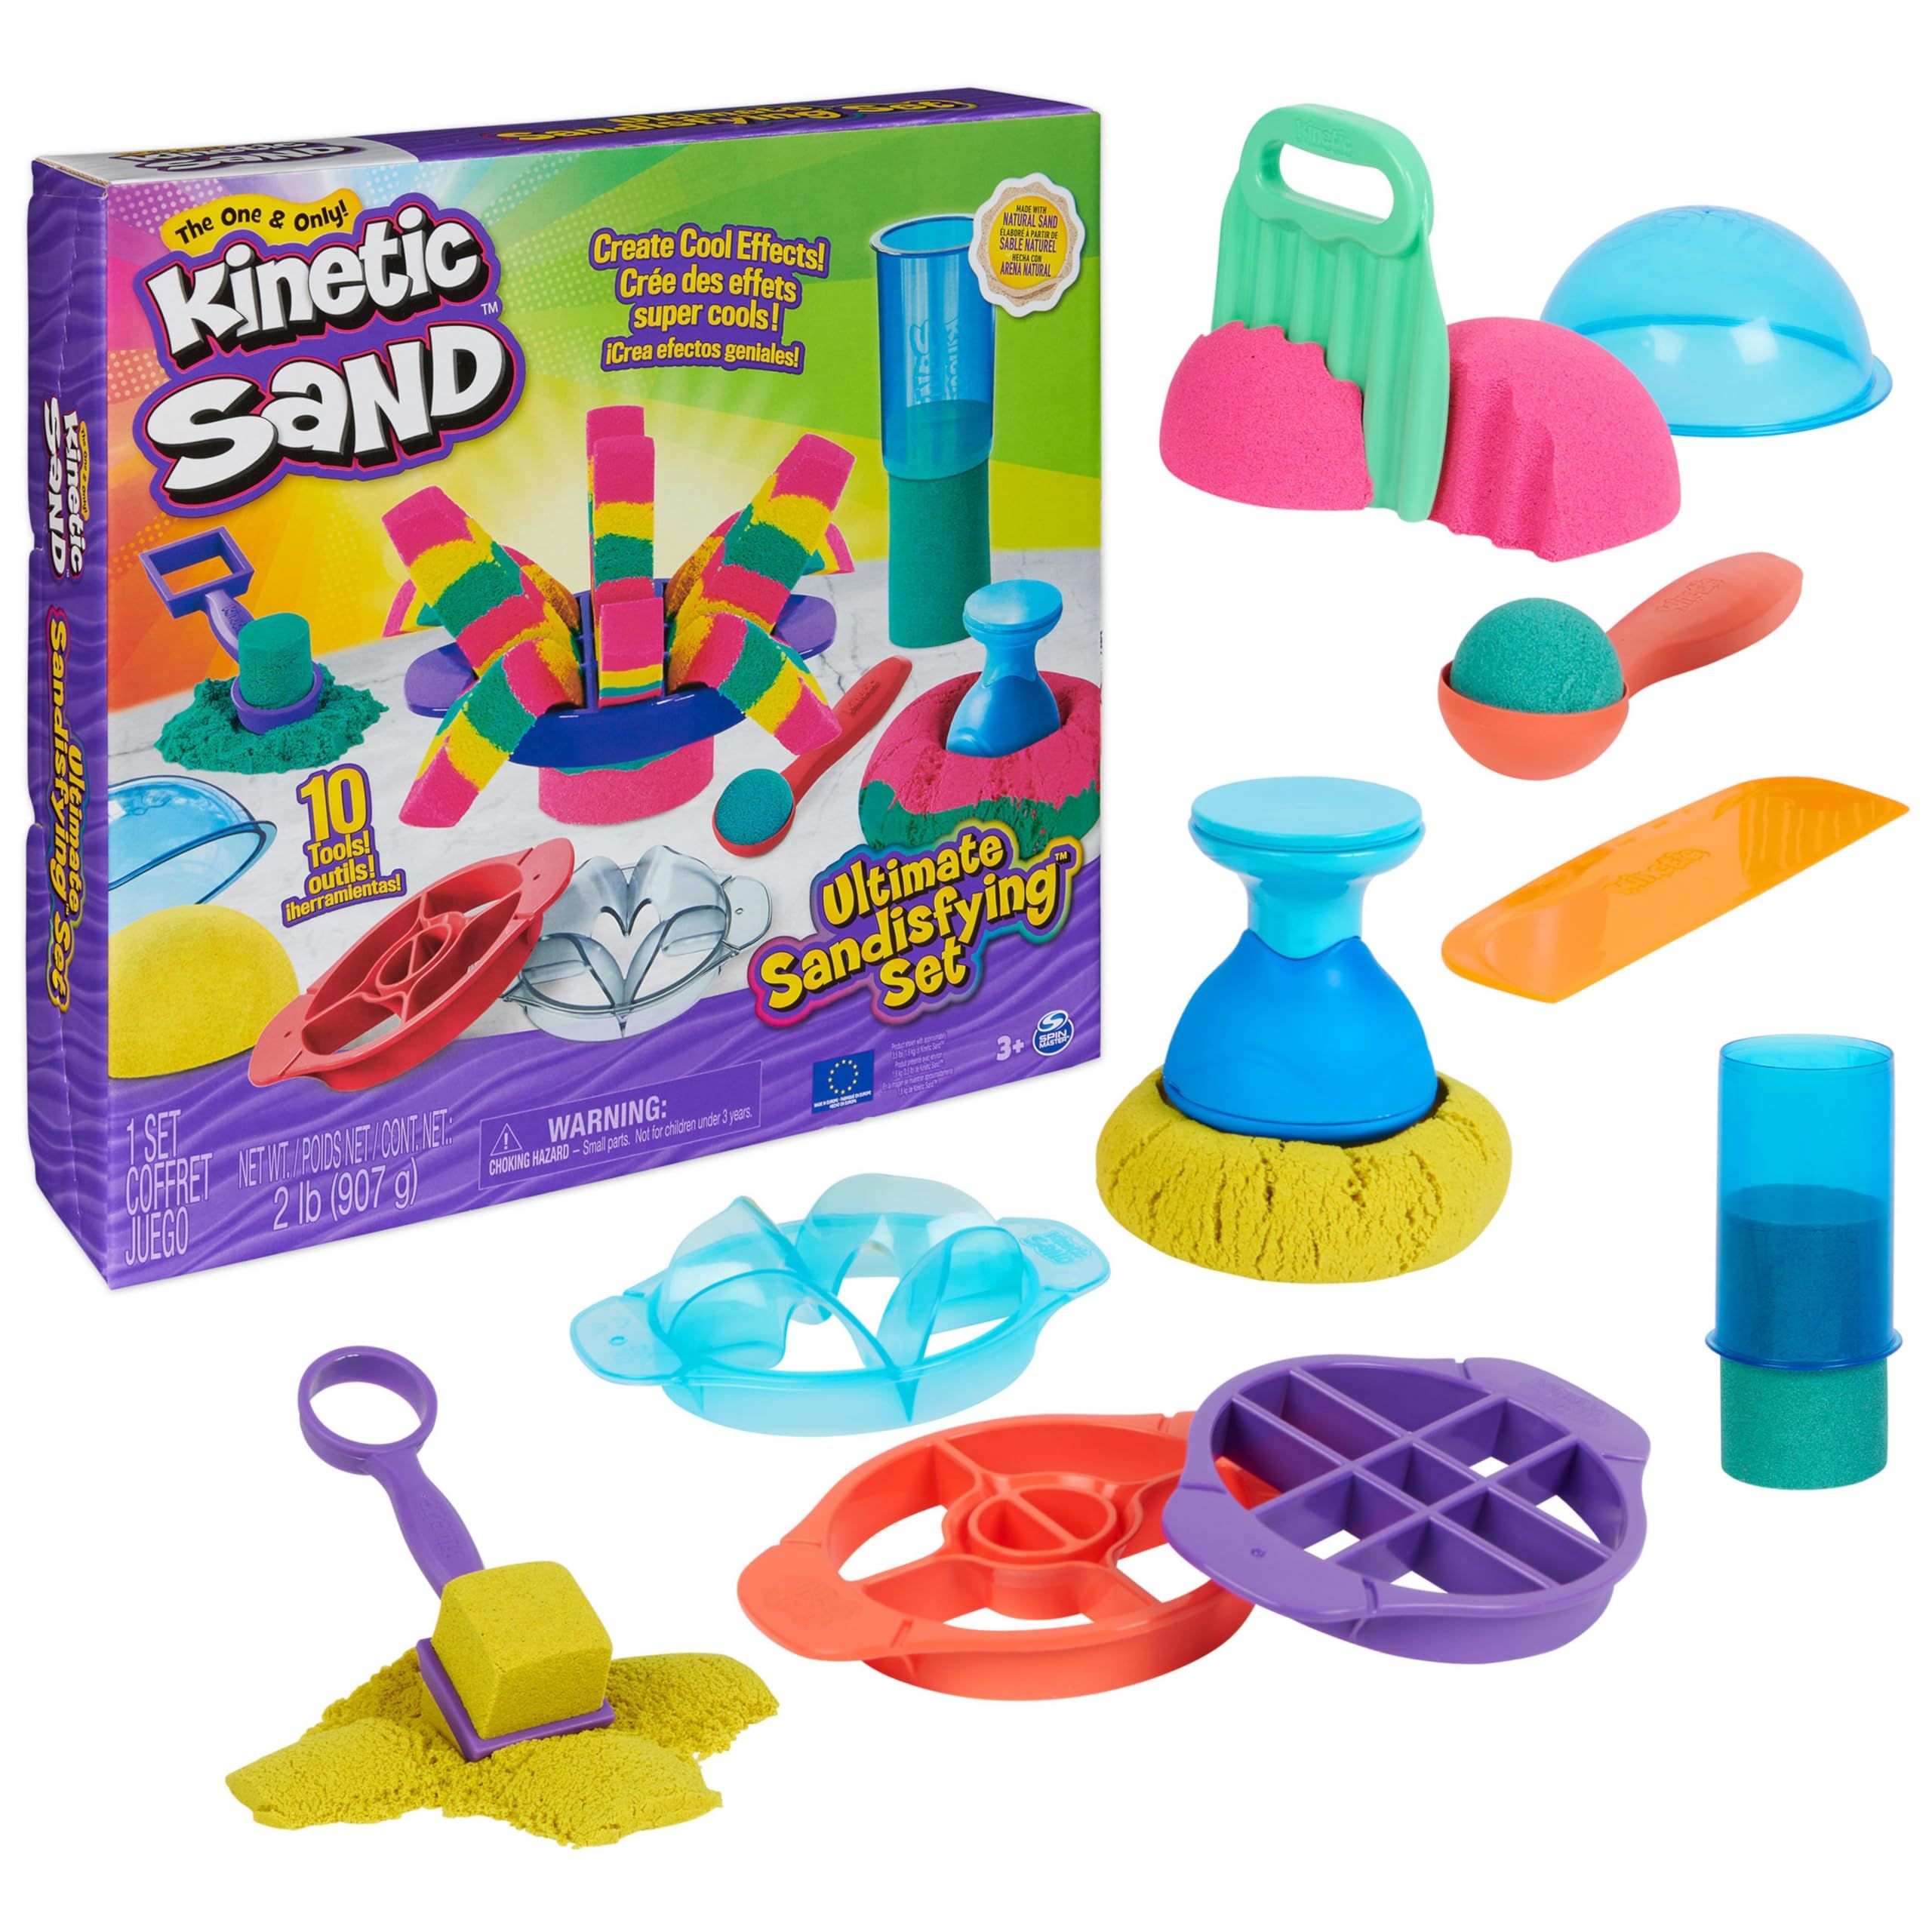 Kinetic Sand Ultimate Sandisfying Set, 2lb of Pink, Yellow and Teal Play Sand, 10 Molds and Tools... | Amazon (US)